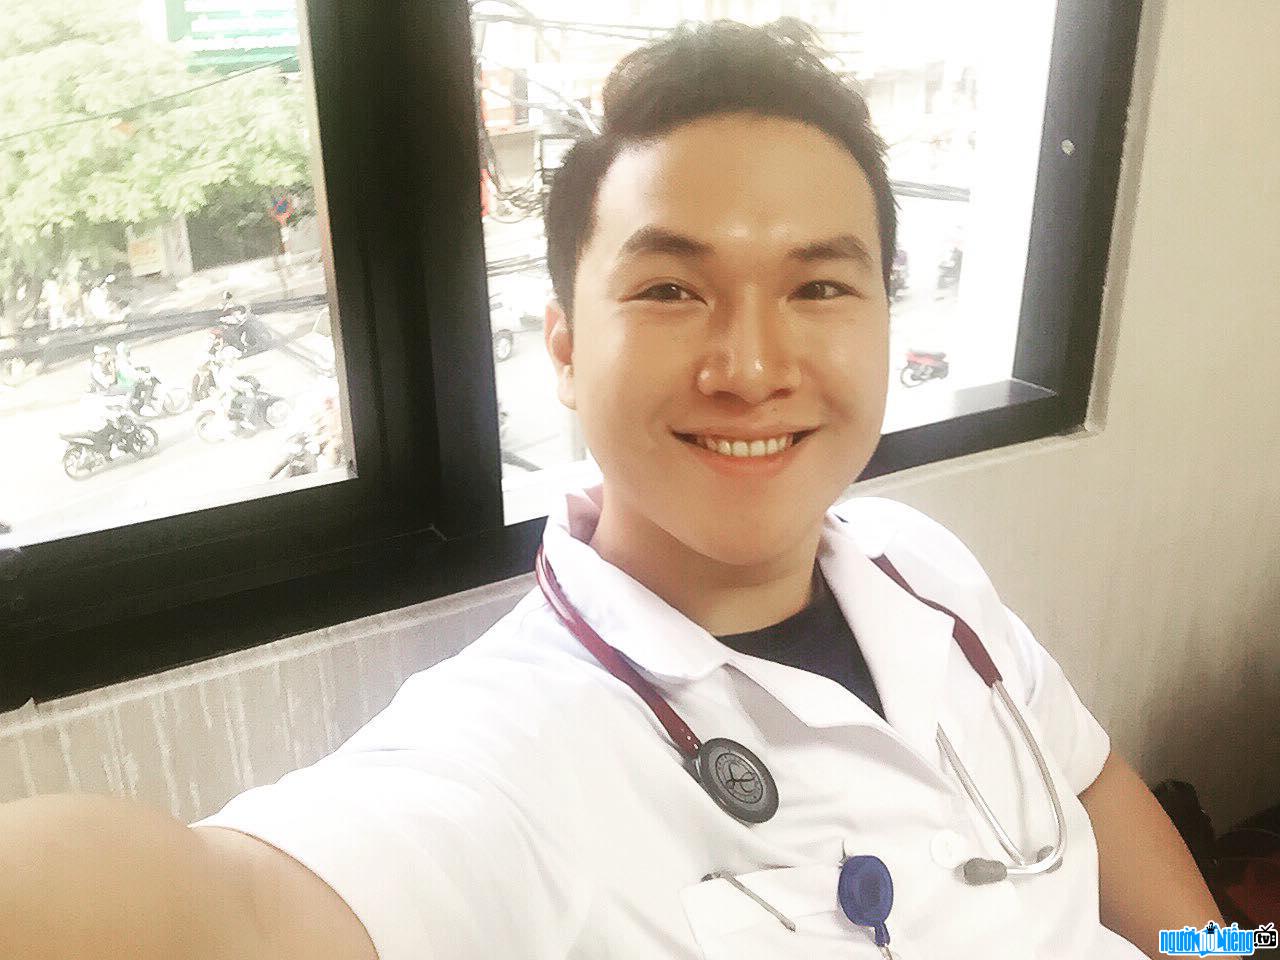 Dr. Duong Minh Tuan is handsome and dynamic